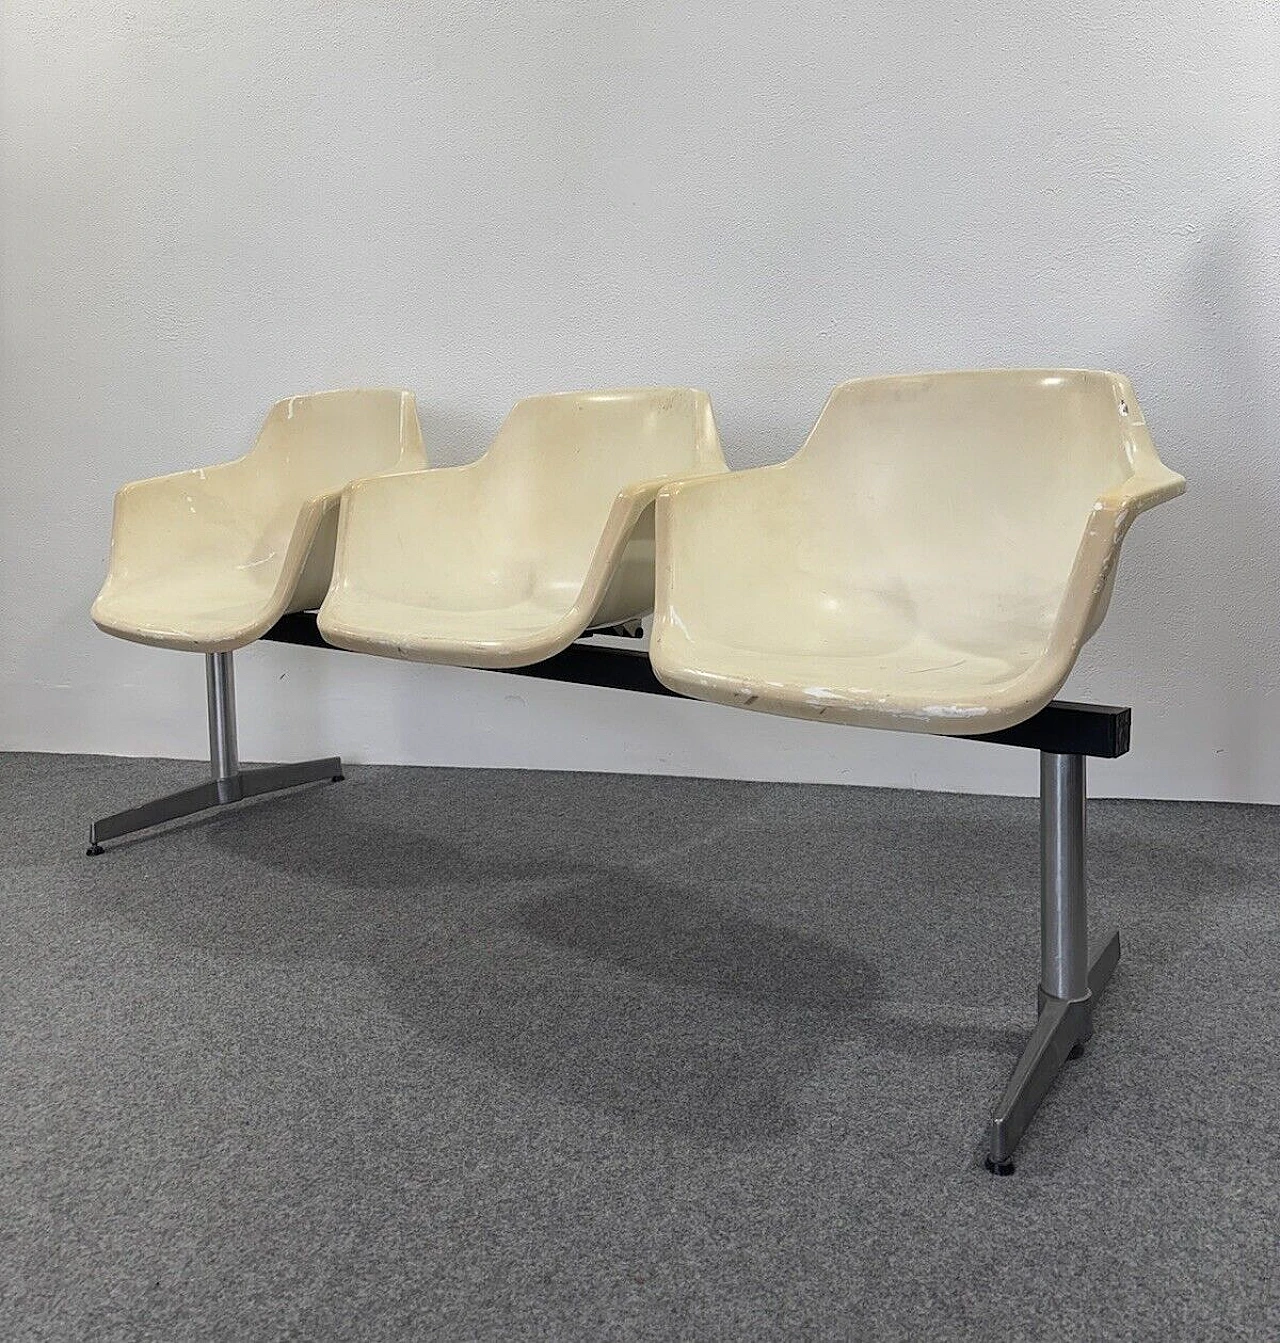 Tandem airport bench by Charles & Ray Eames for Herman Miller 1